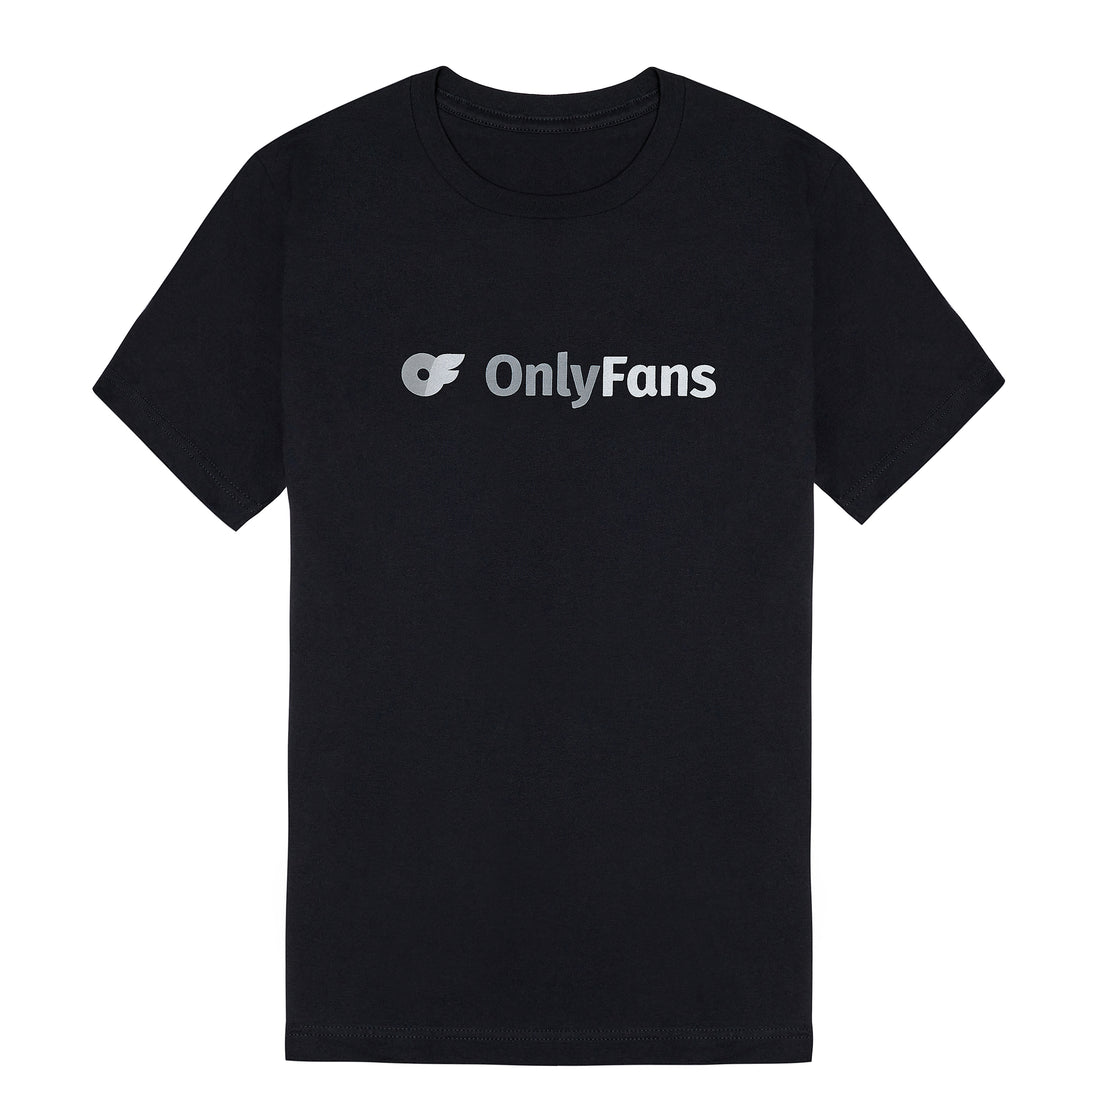 The Best Clothing Items To Wear For Your OnlyFans - Follower